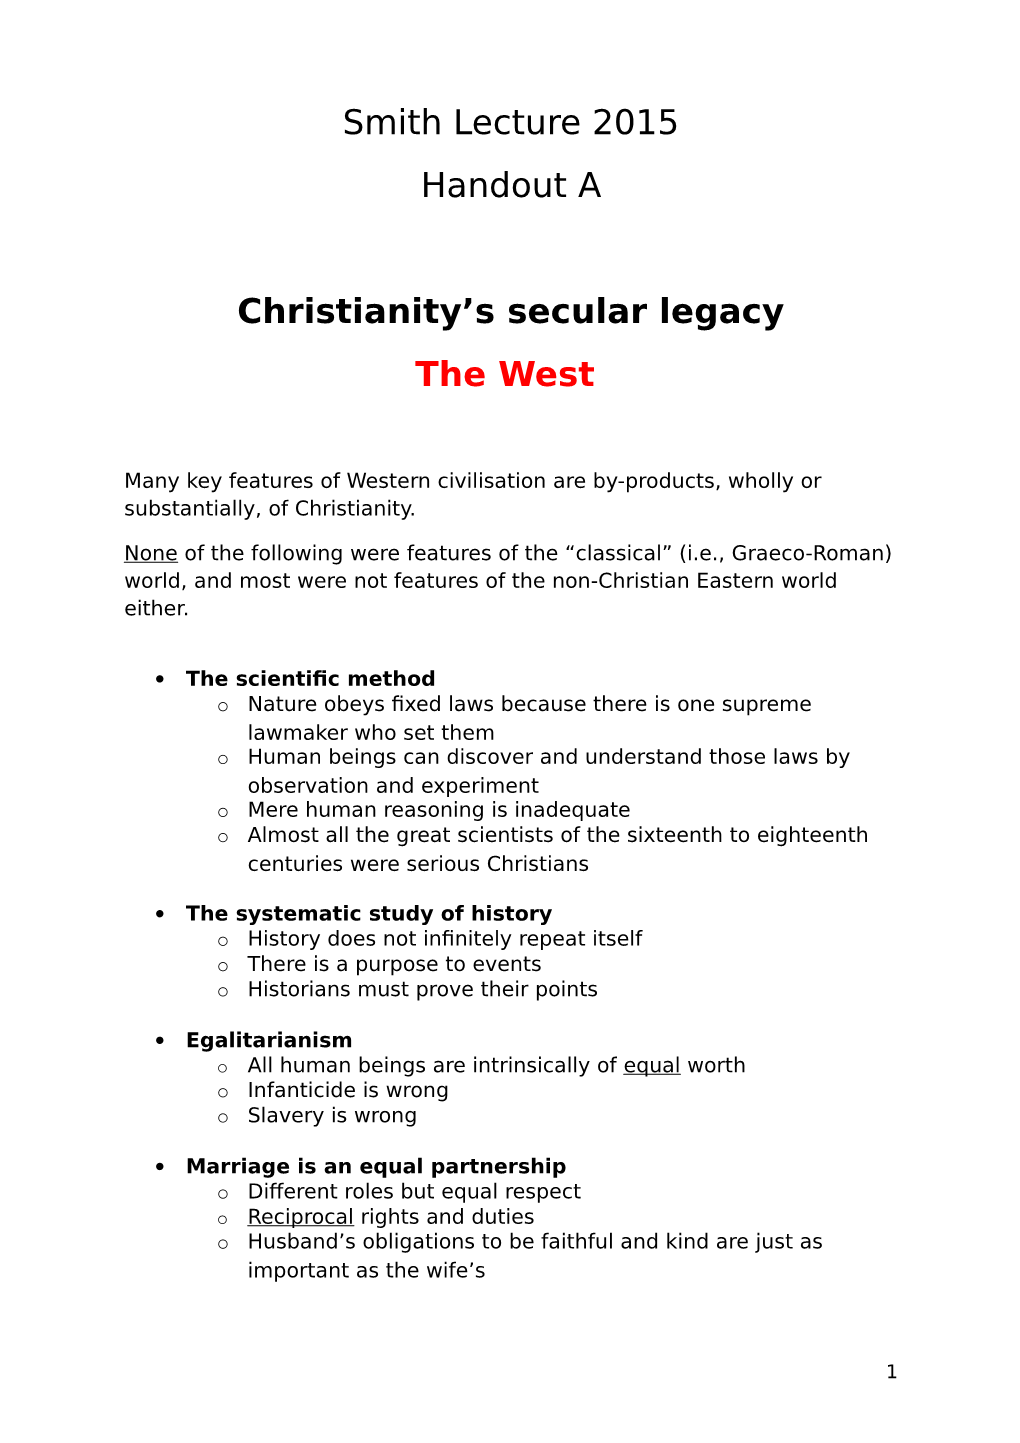 Smith Lecture 2015 Handout a Christianity's Secular Legacy the West